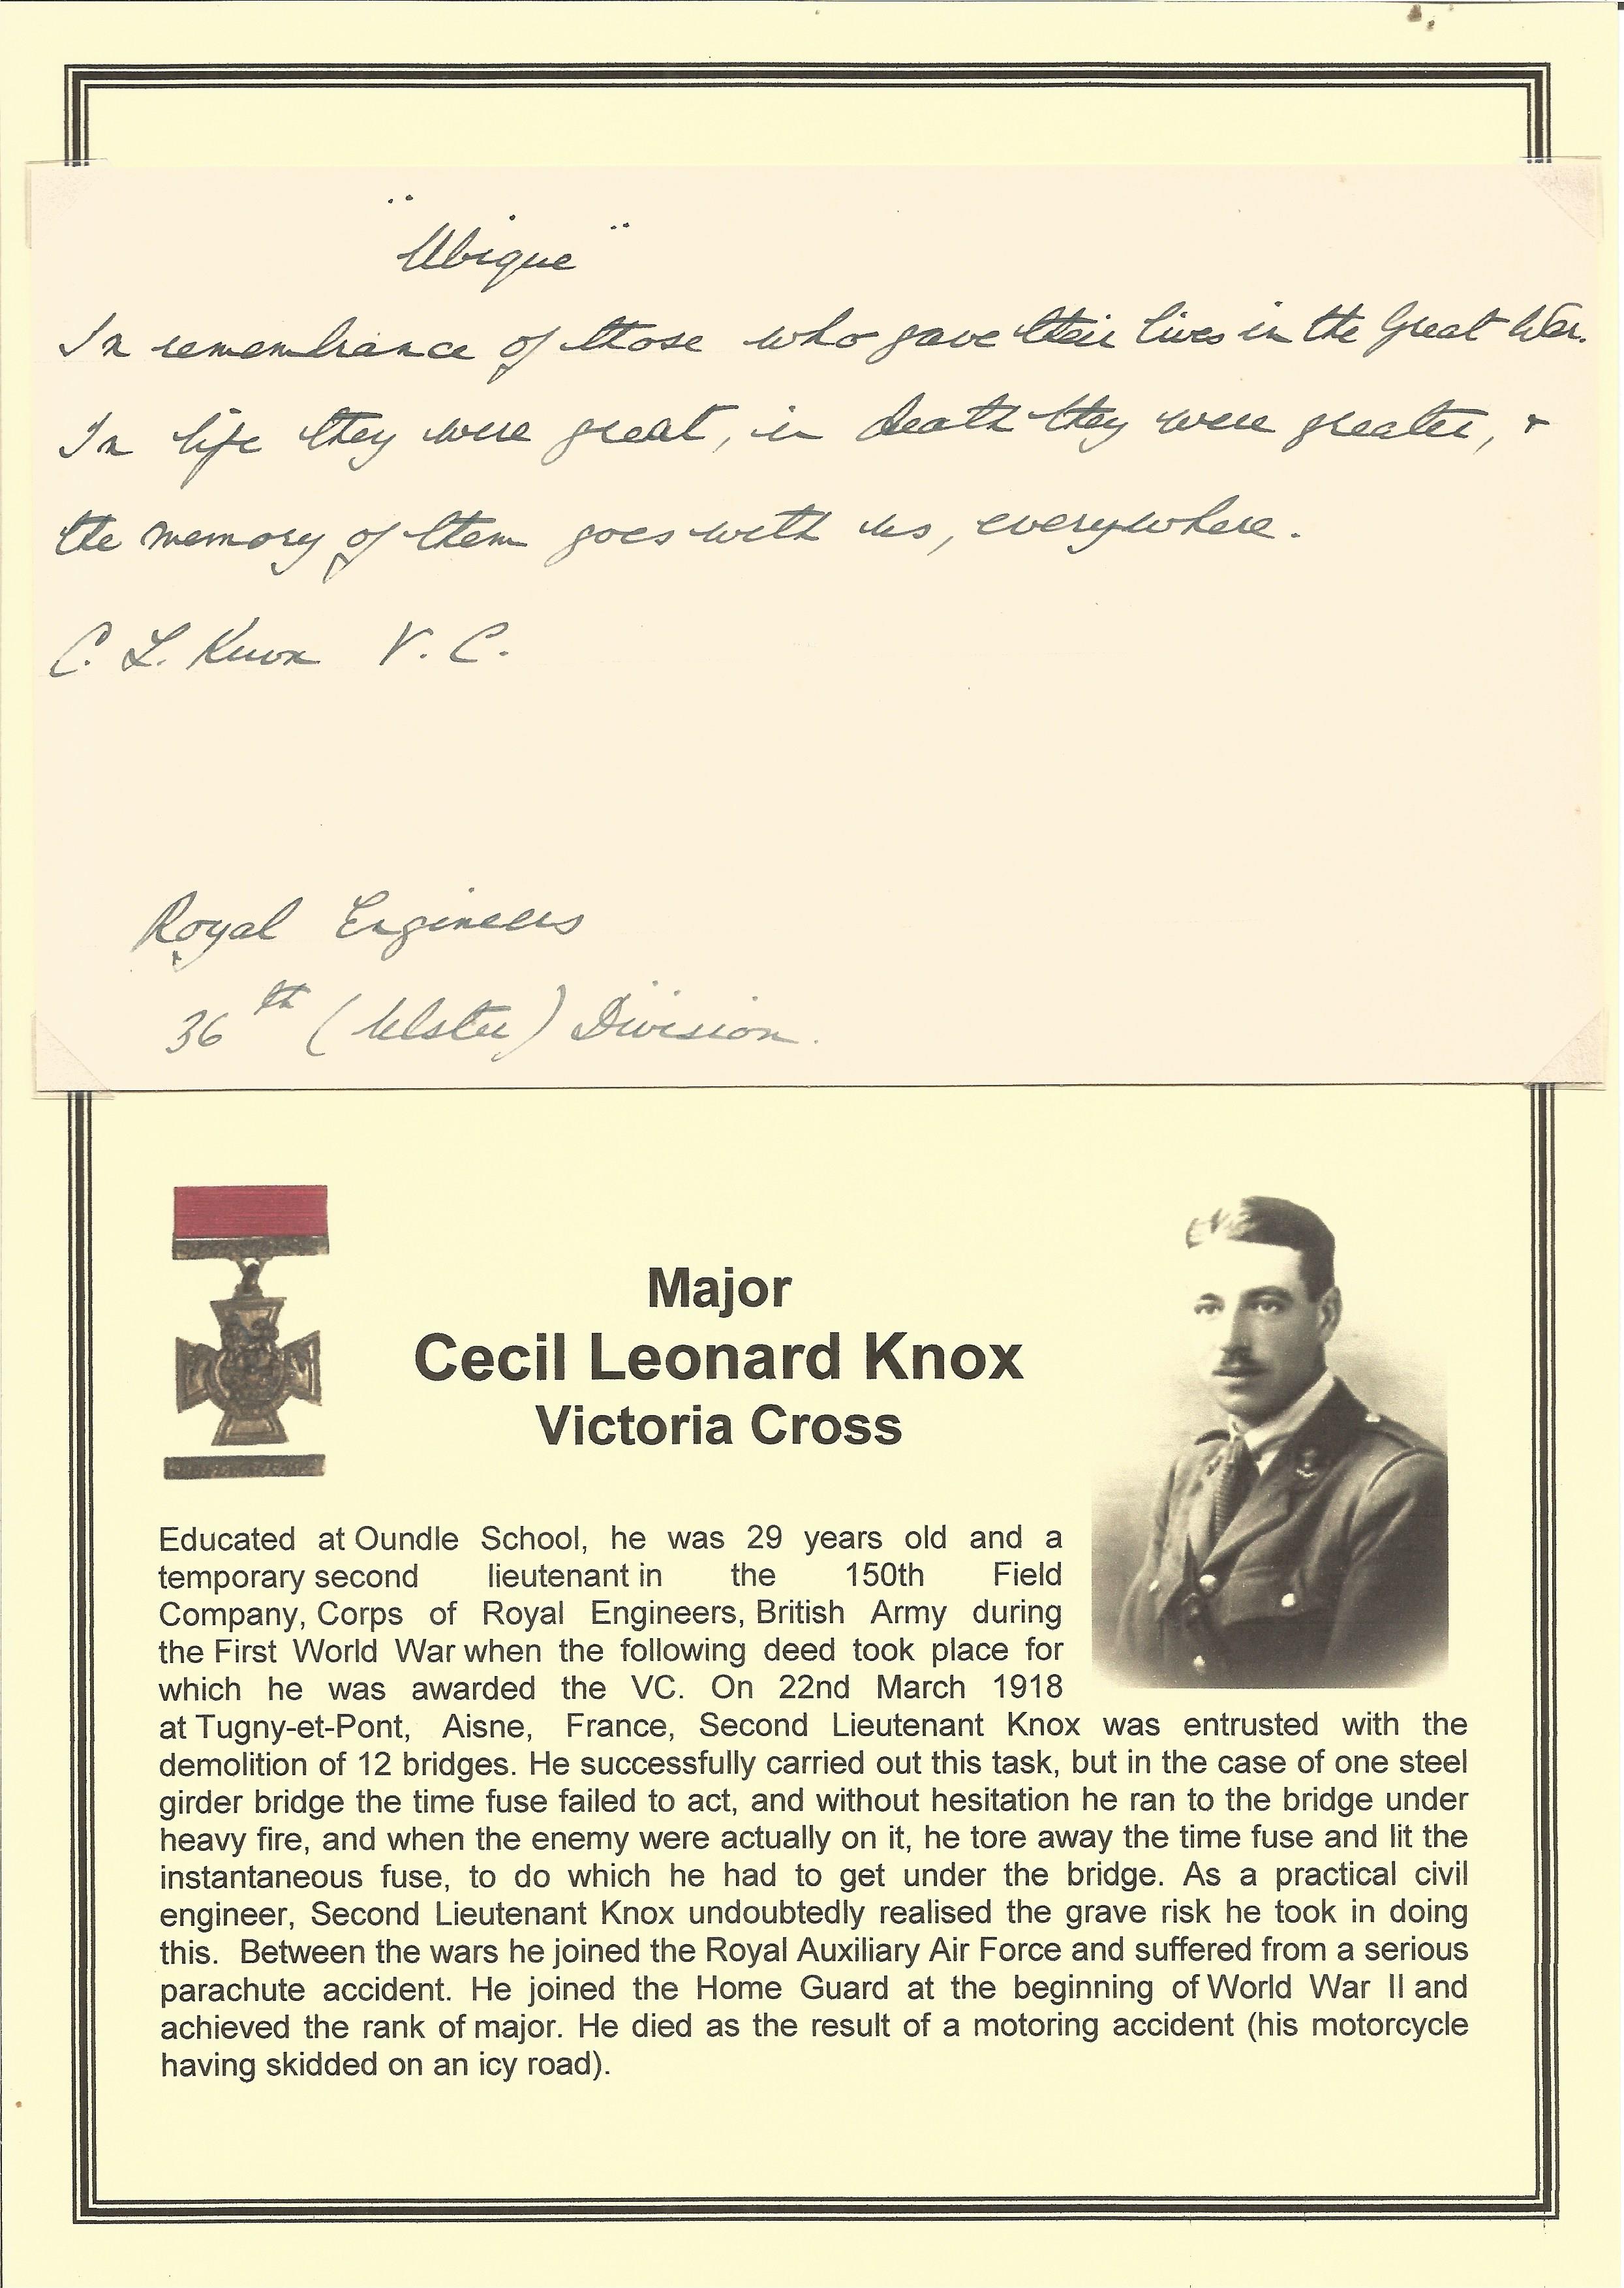 Major Cecil Leonard Knox VC signed and hand-written note on card, to remember those who gave their